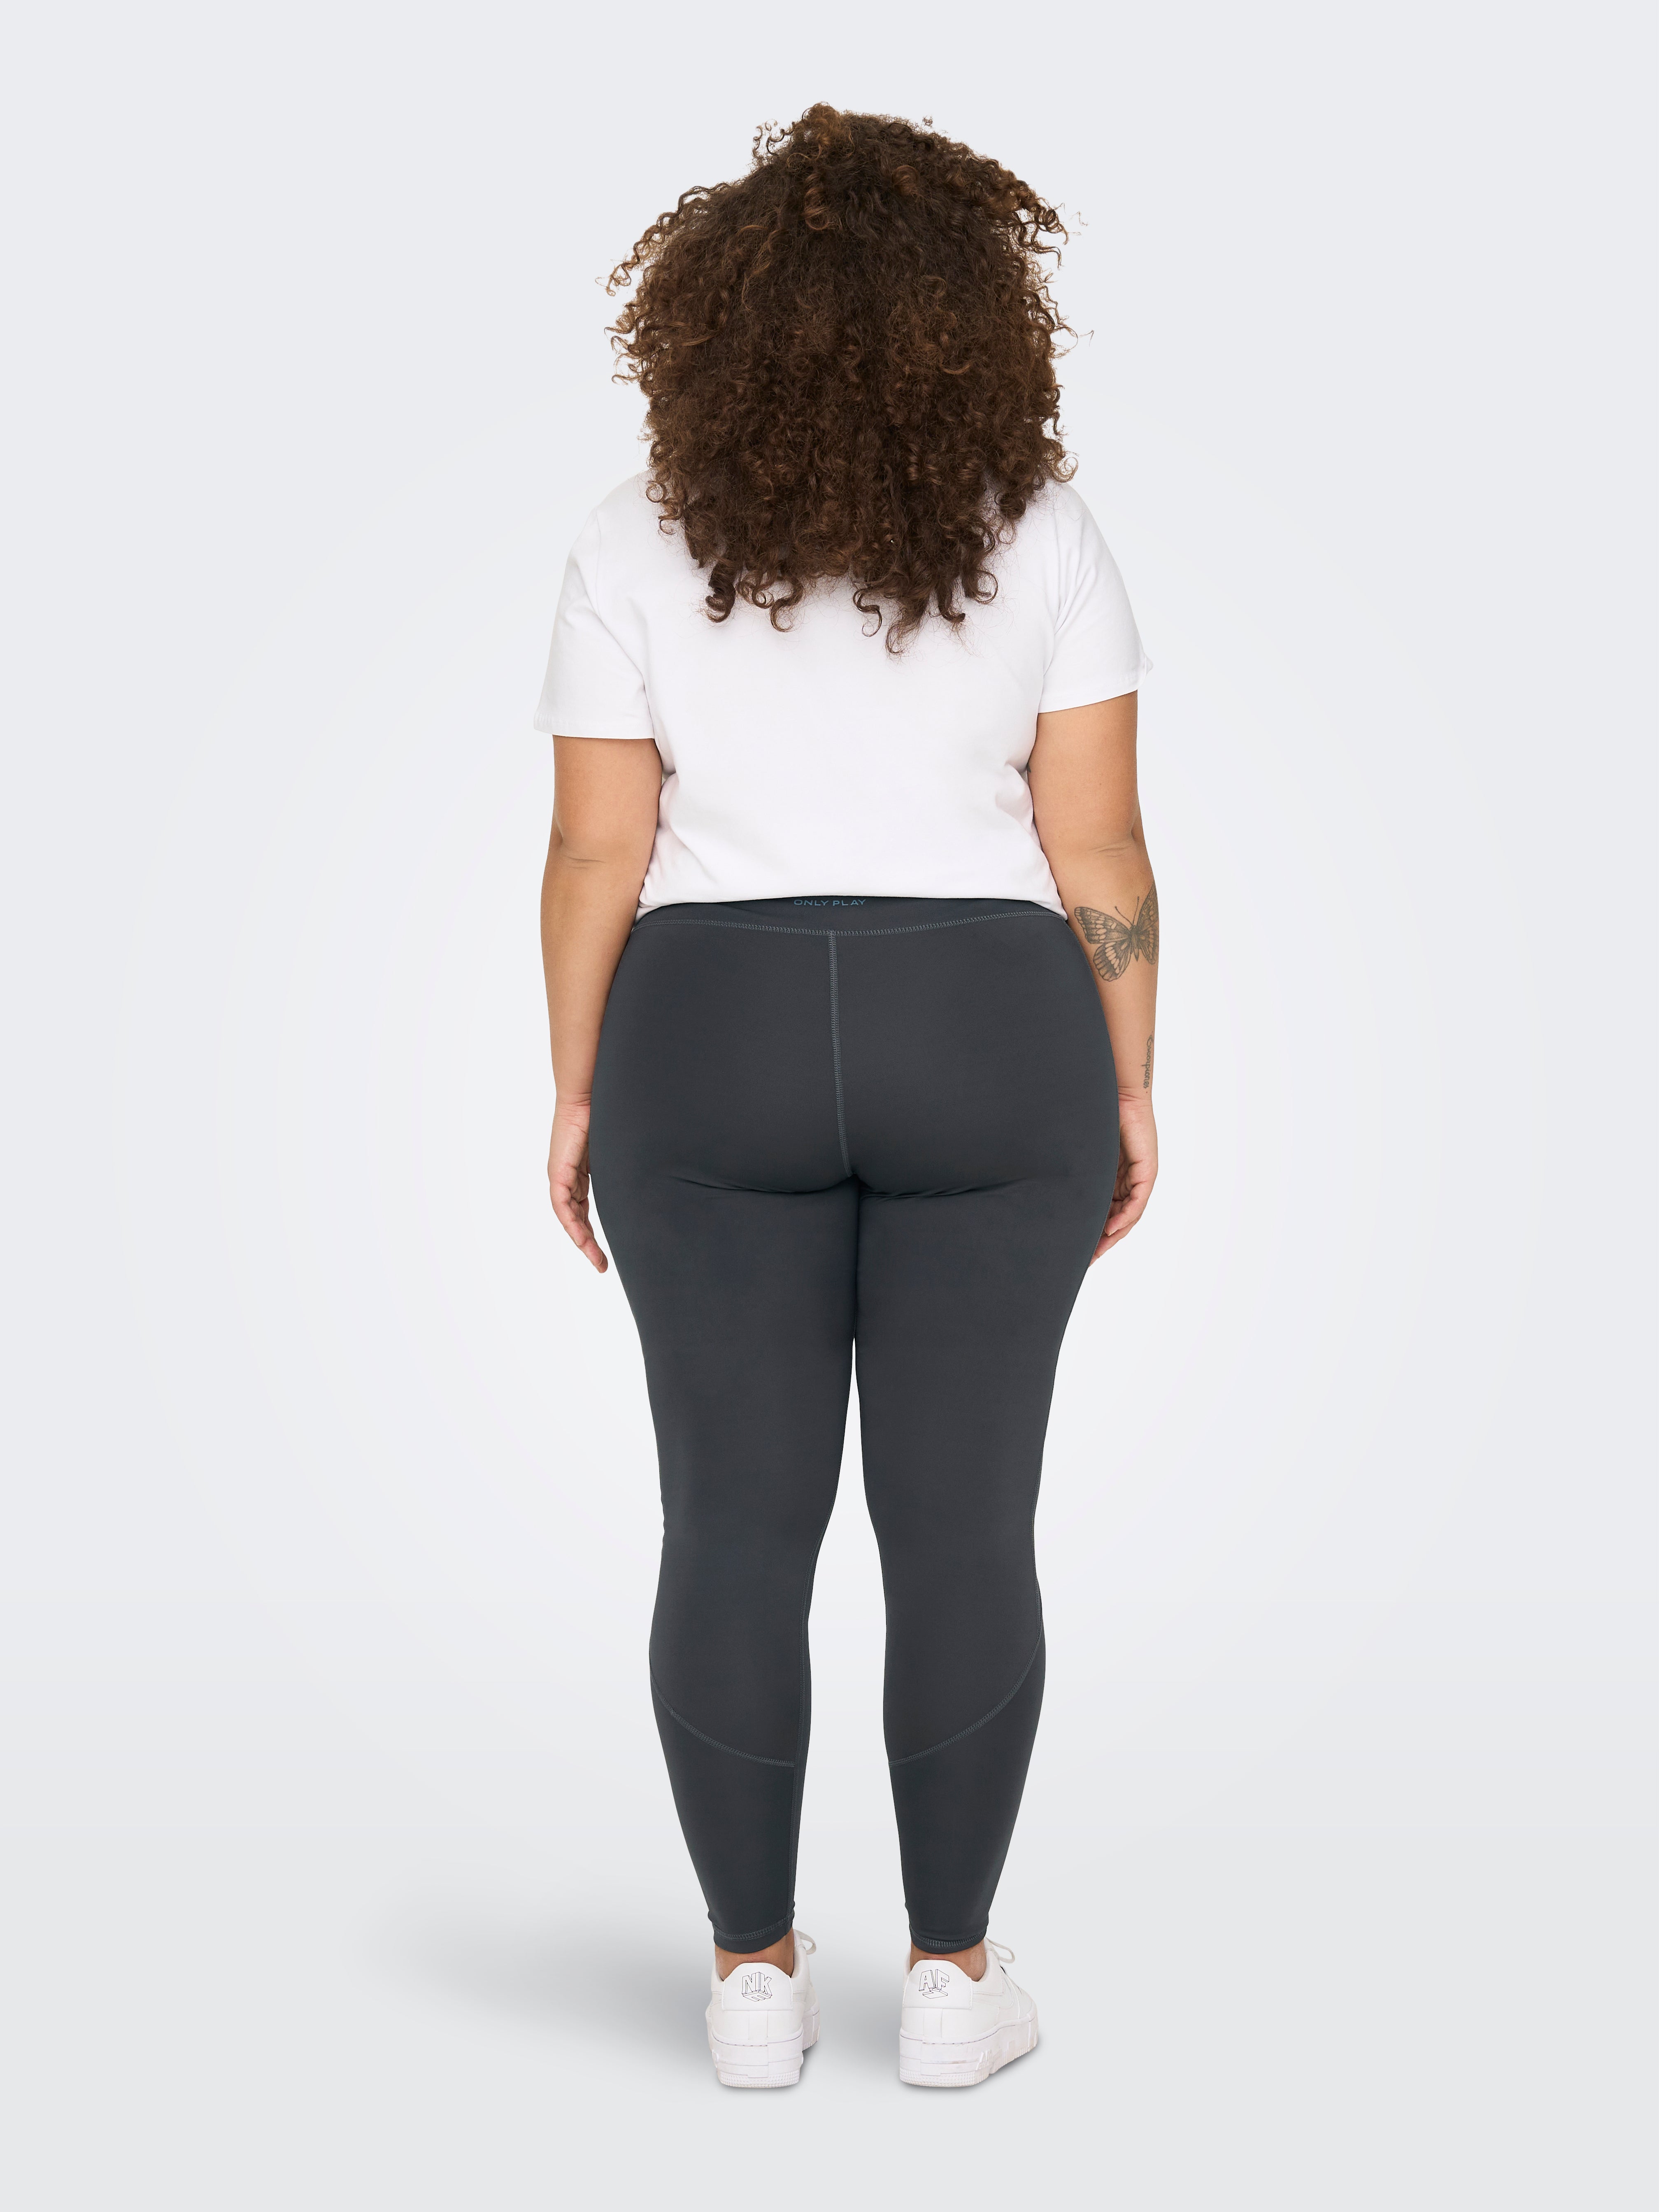 Tight Fit High waist Curve Leggings with 20% discount!